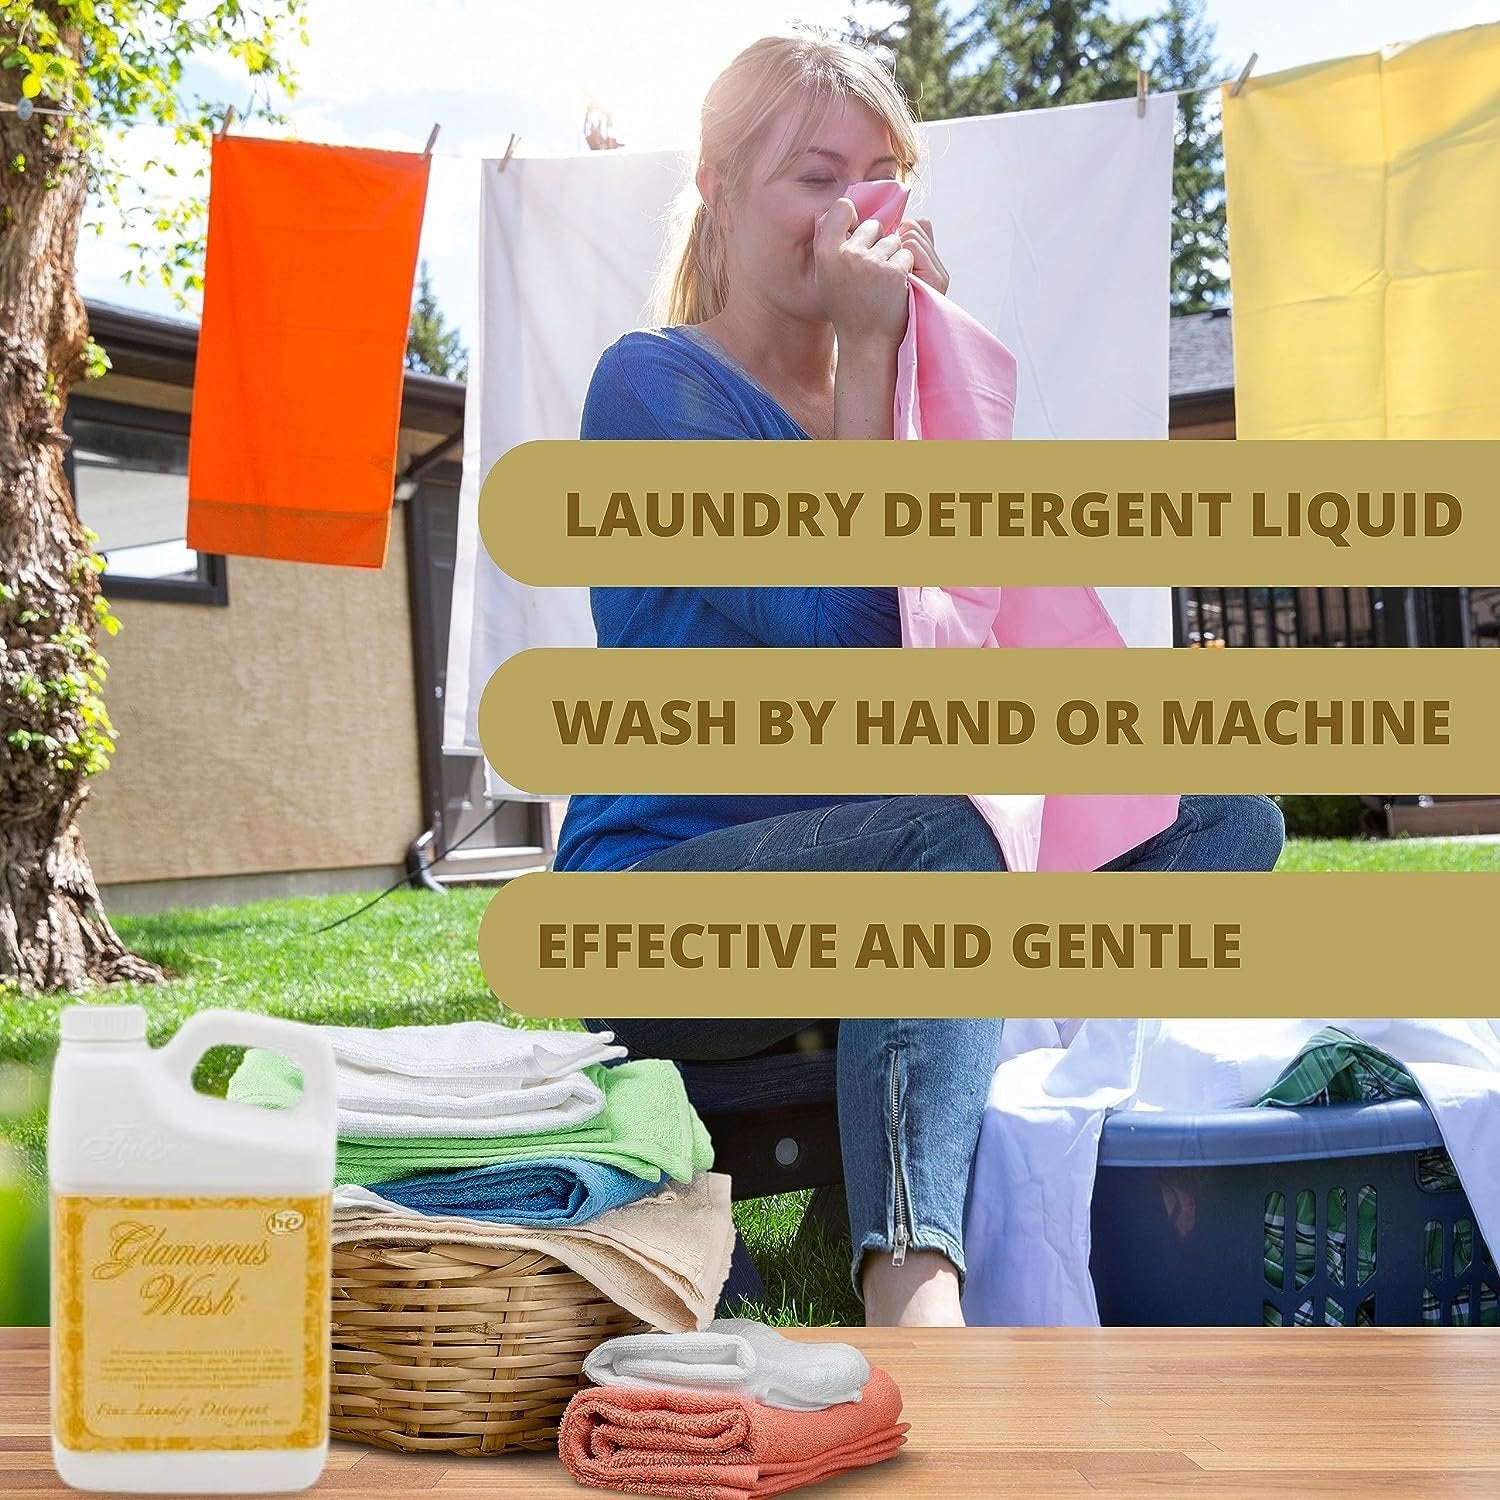 Worldwide Nutrition Bundle, 2 Items: Tyler Glamorous Wash Wishlist Scent Fine Laundry Liquid Detergent - Hand and Machine Washable - 907g (32 Fl Oz) Container and Multi-Purpose Key Chain